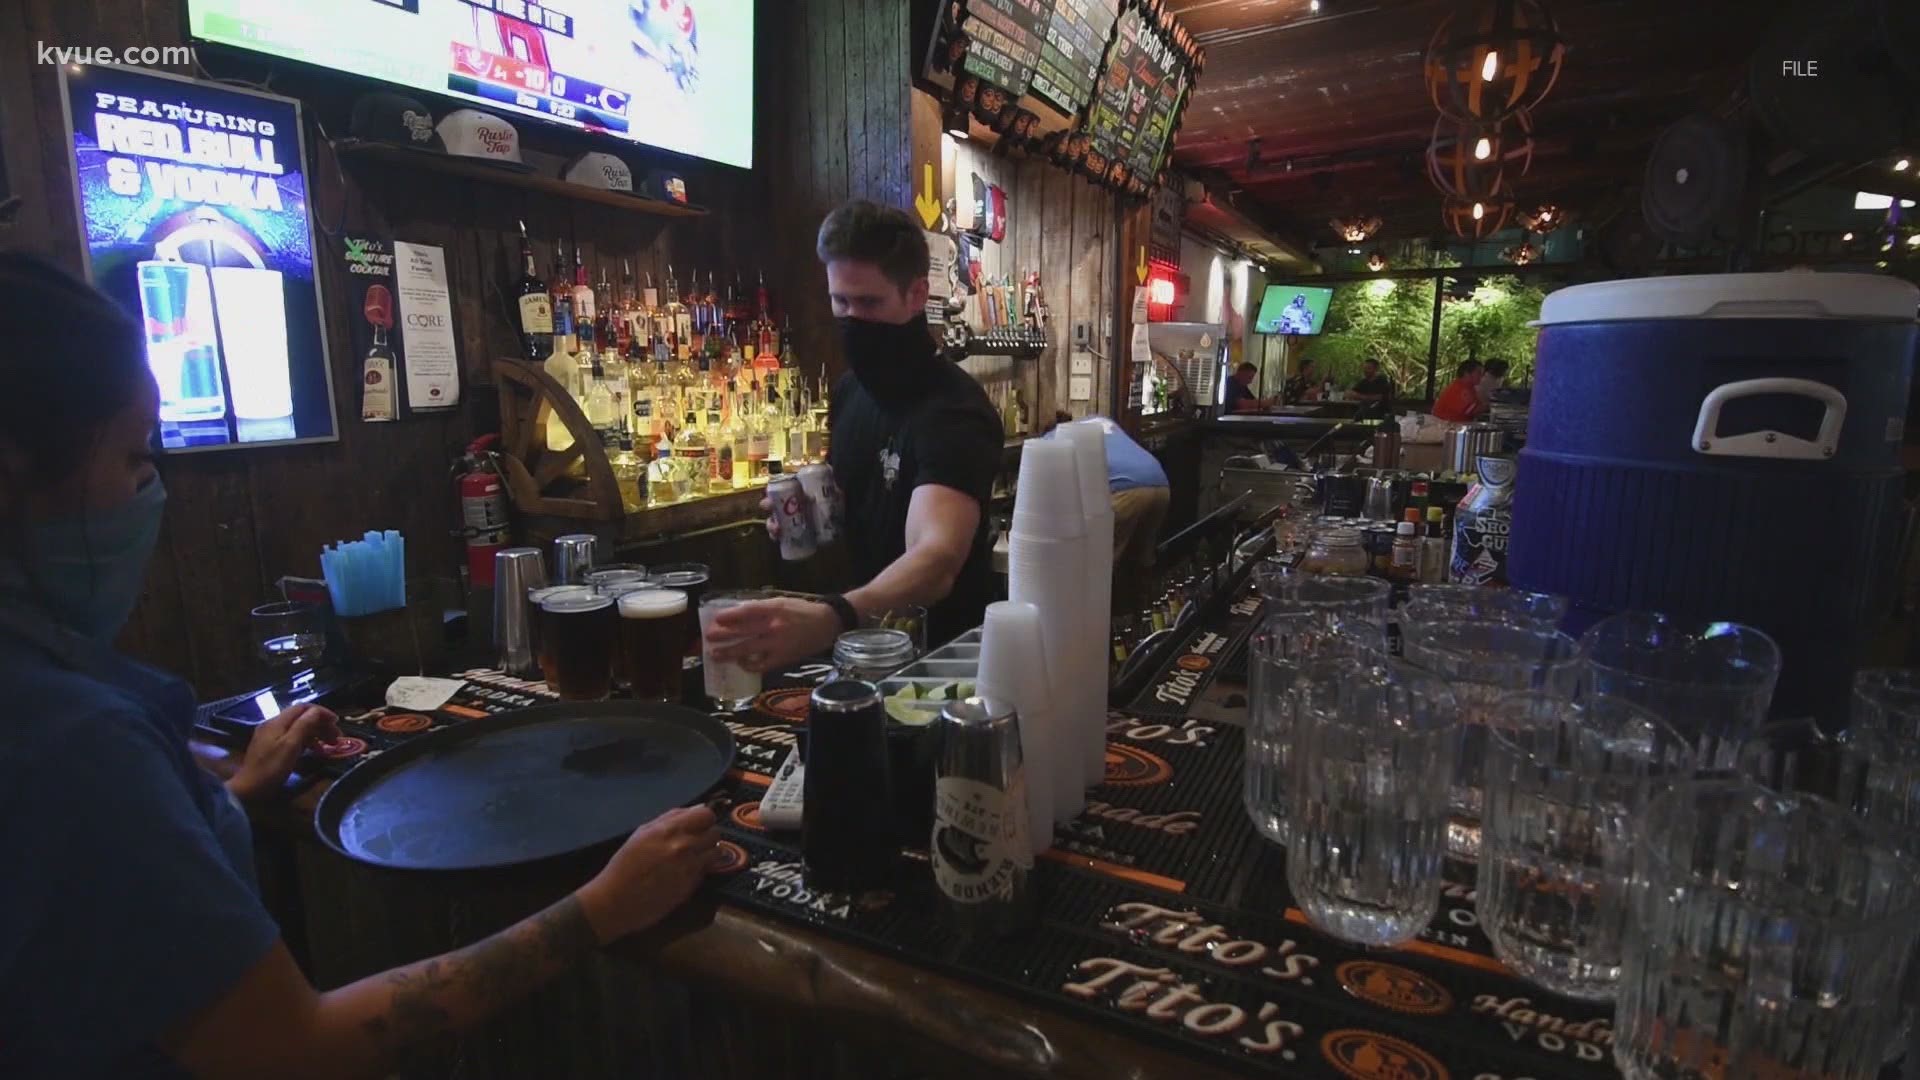 Since the summer, more than 3,000 people have complained to the State about Texas bars violating COVID-19 restrictions.